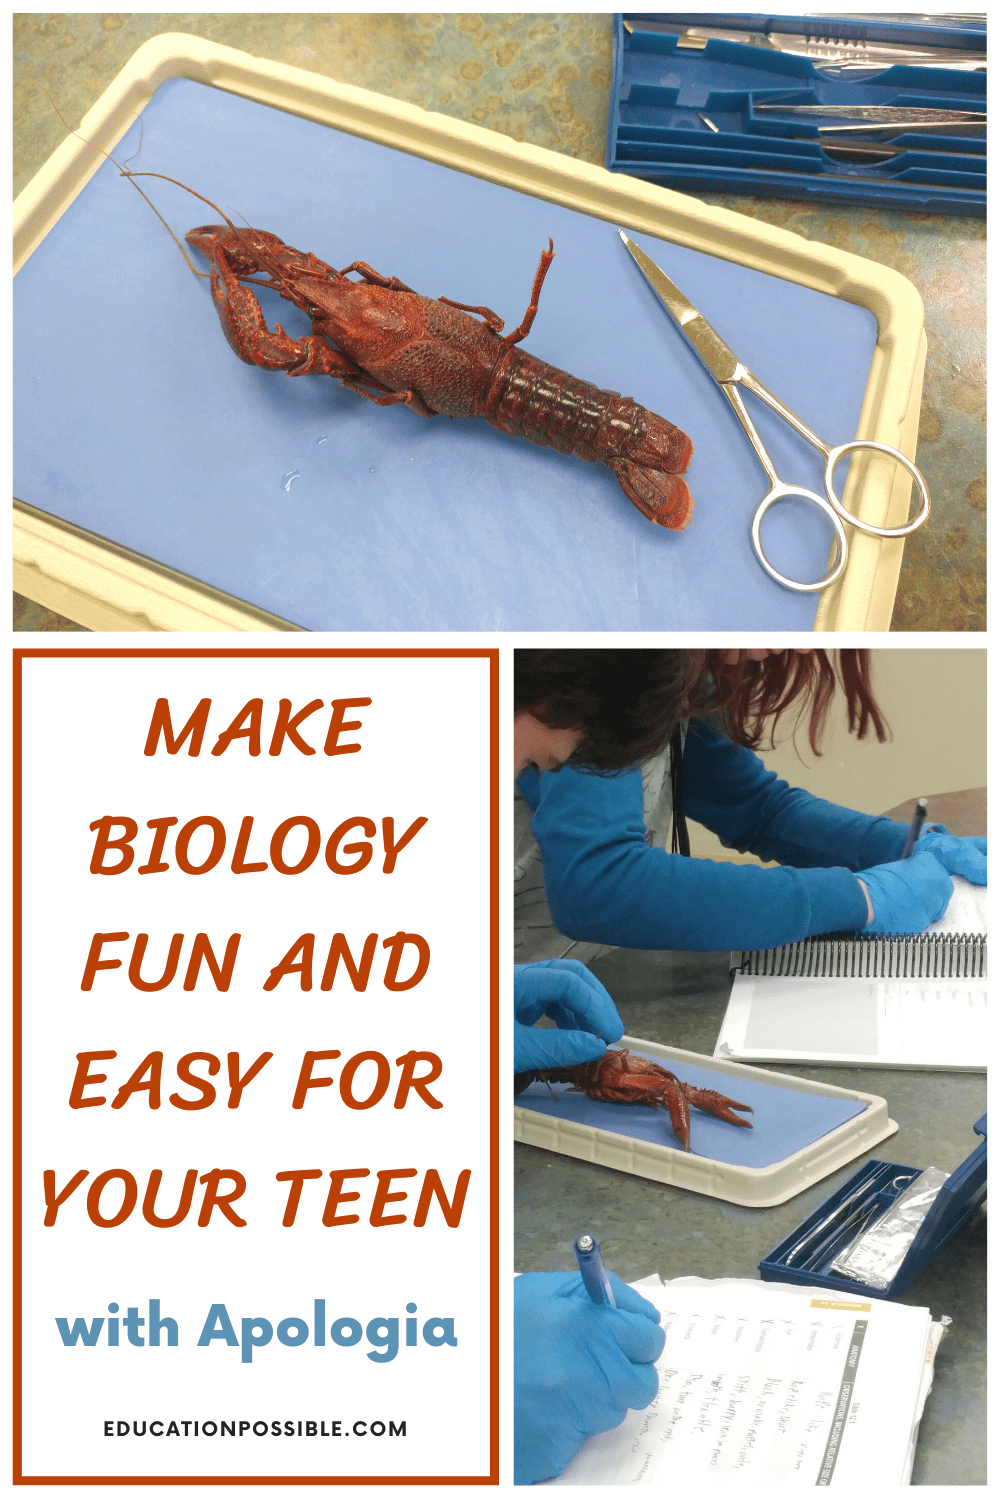 Collage of two images from high school biology class. Top image is a crayfish on a dissecting tray with scissors next to it. Bottom right image is two kids writing in notebooks while inspecting the crayfish.